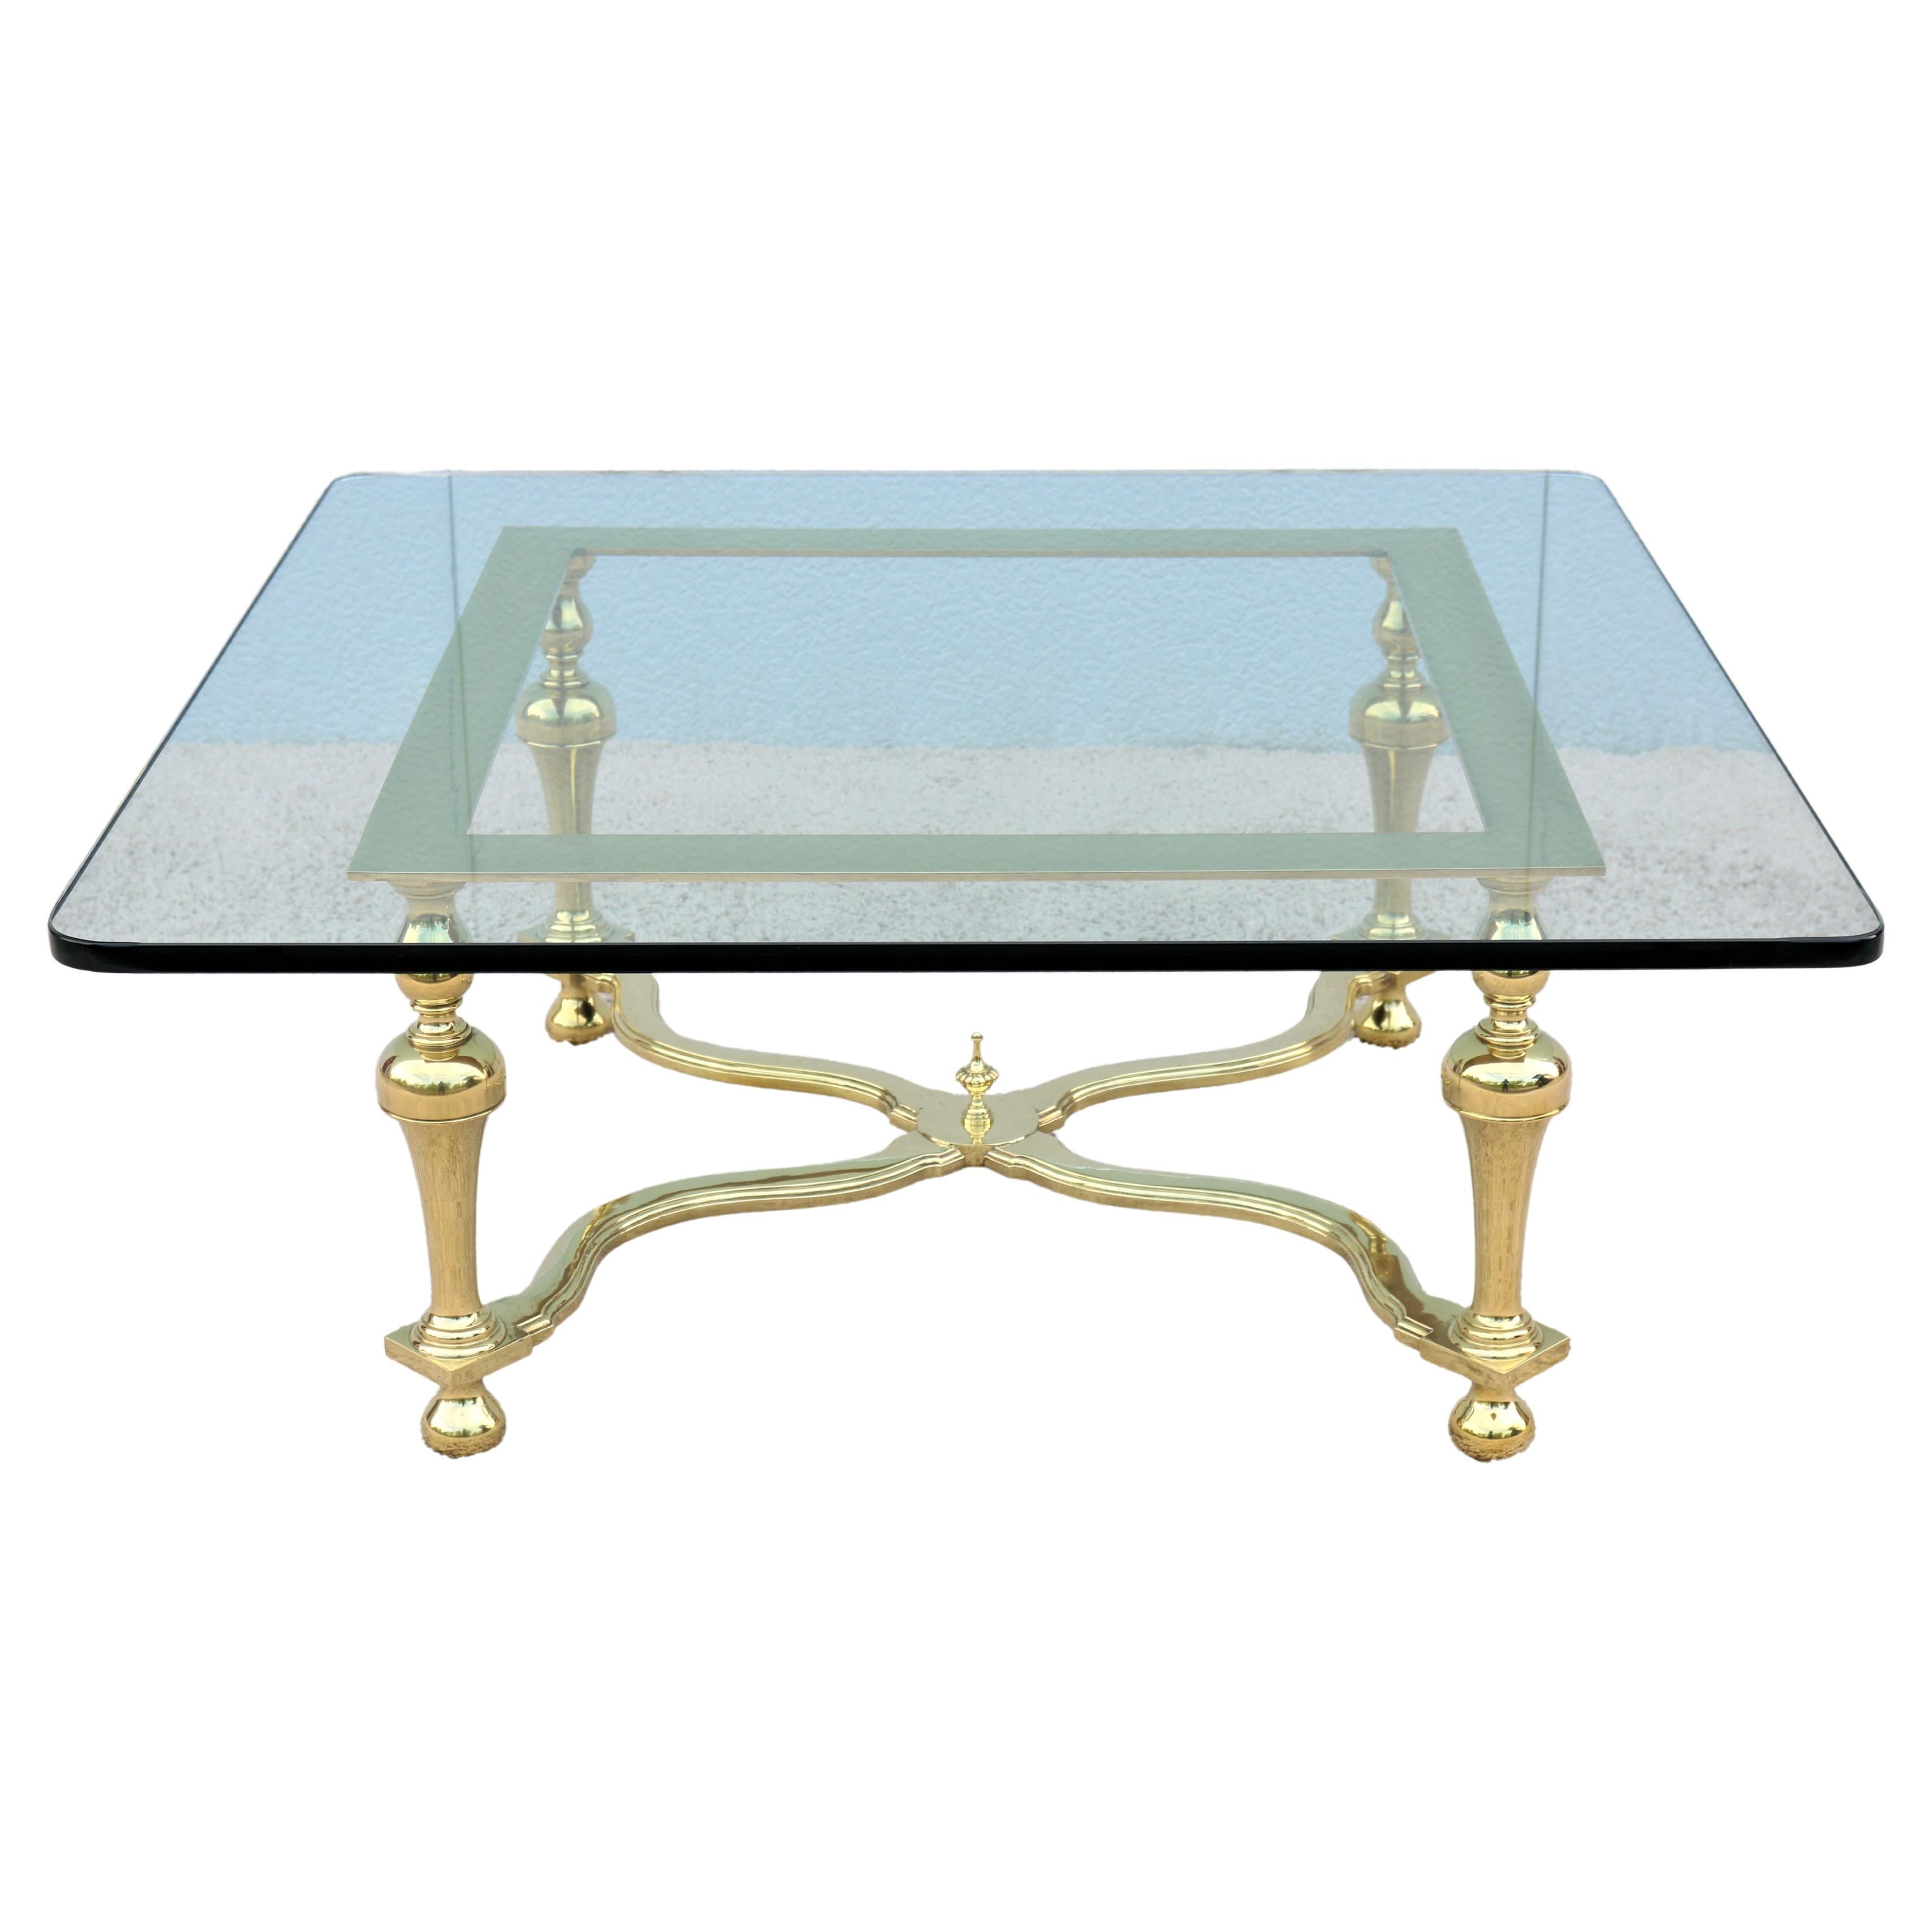 1970s Hollywood Regency Maison Jansen Style Brass and Glass Square Coffee Table For Sale